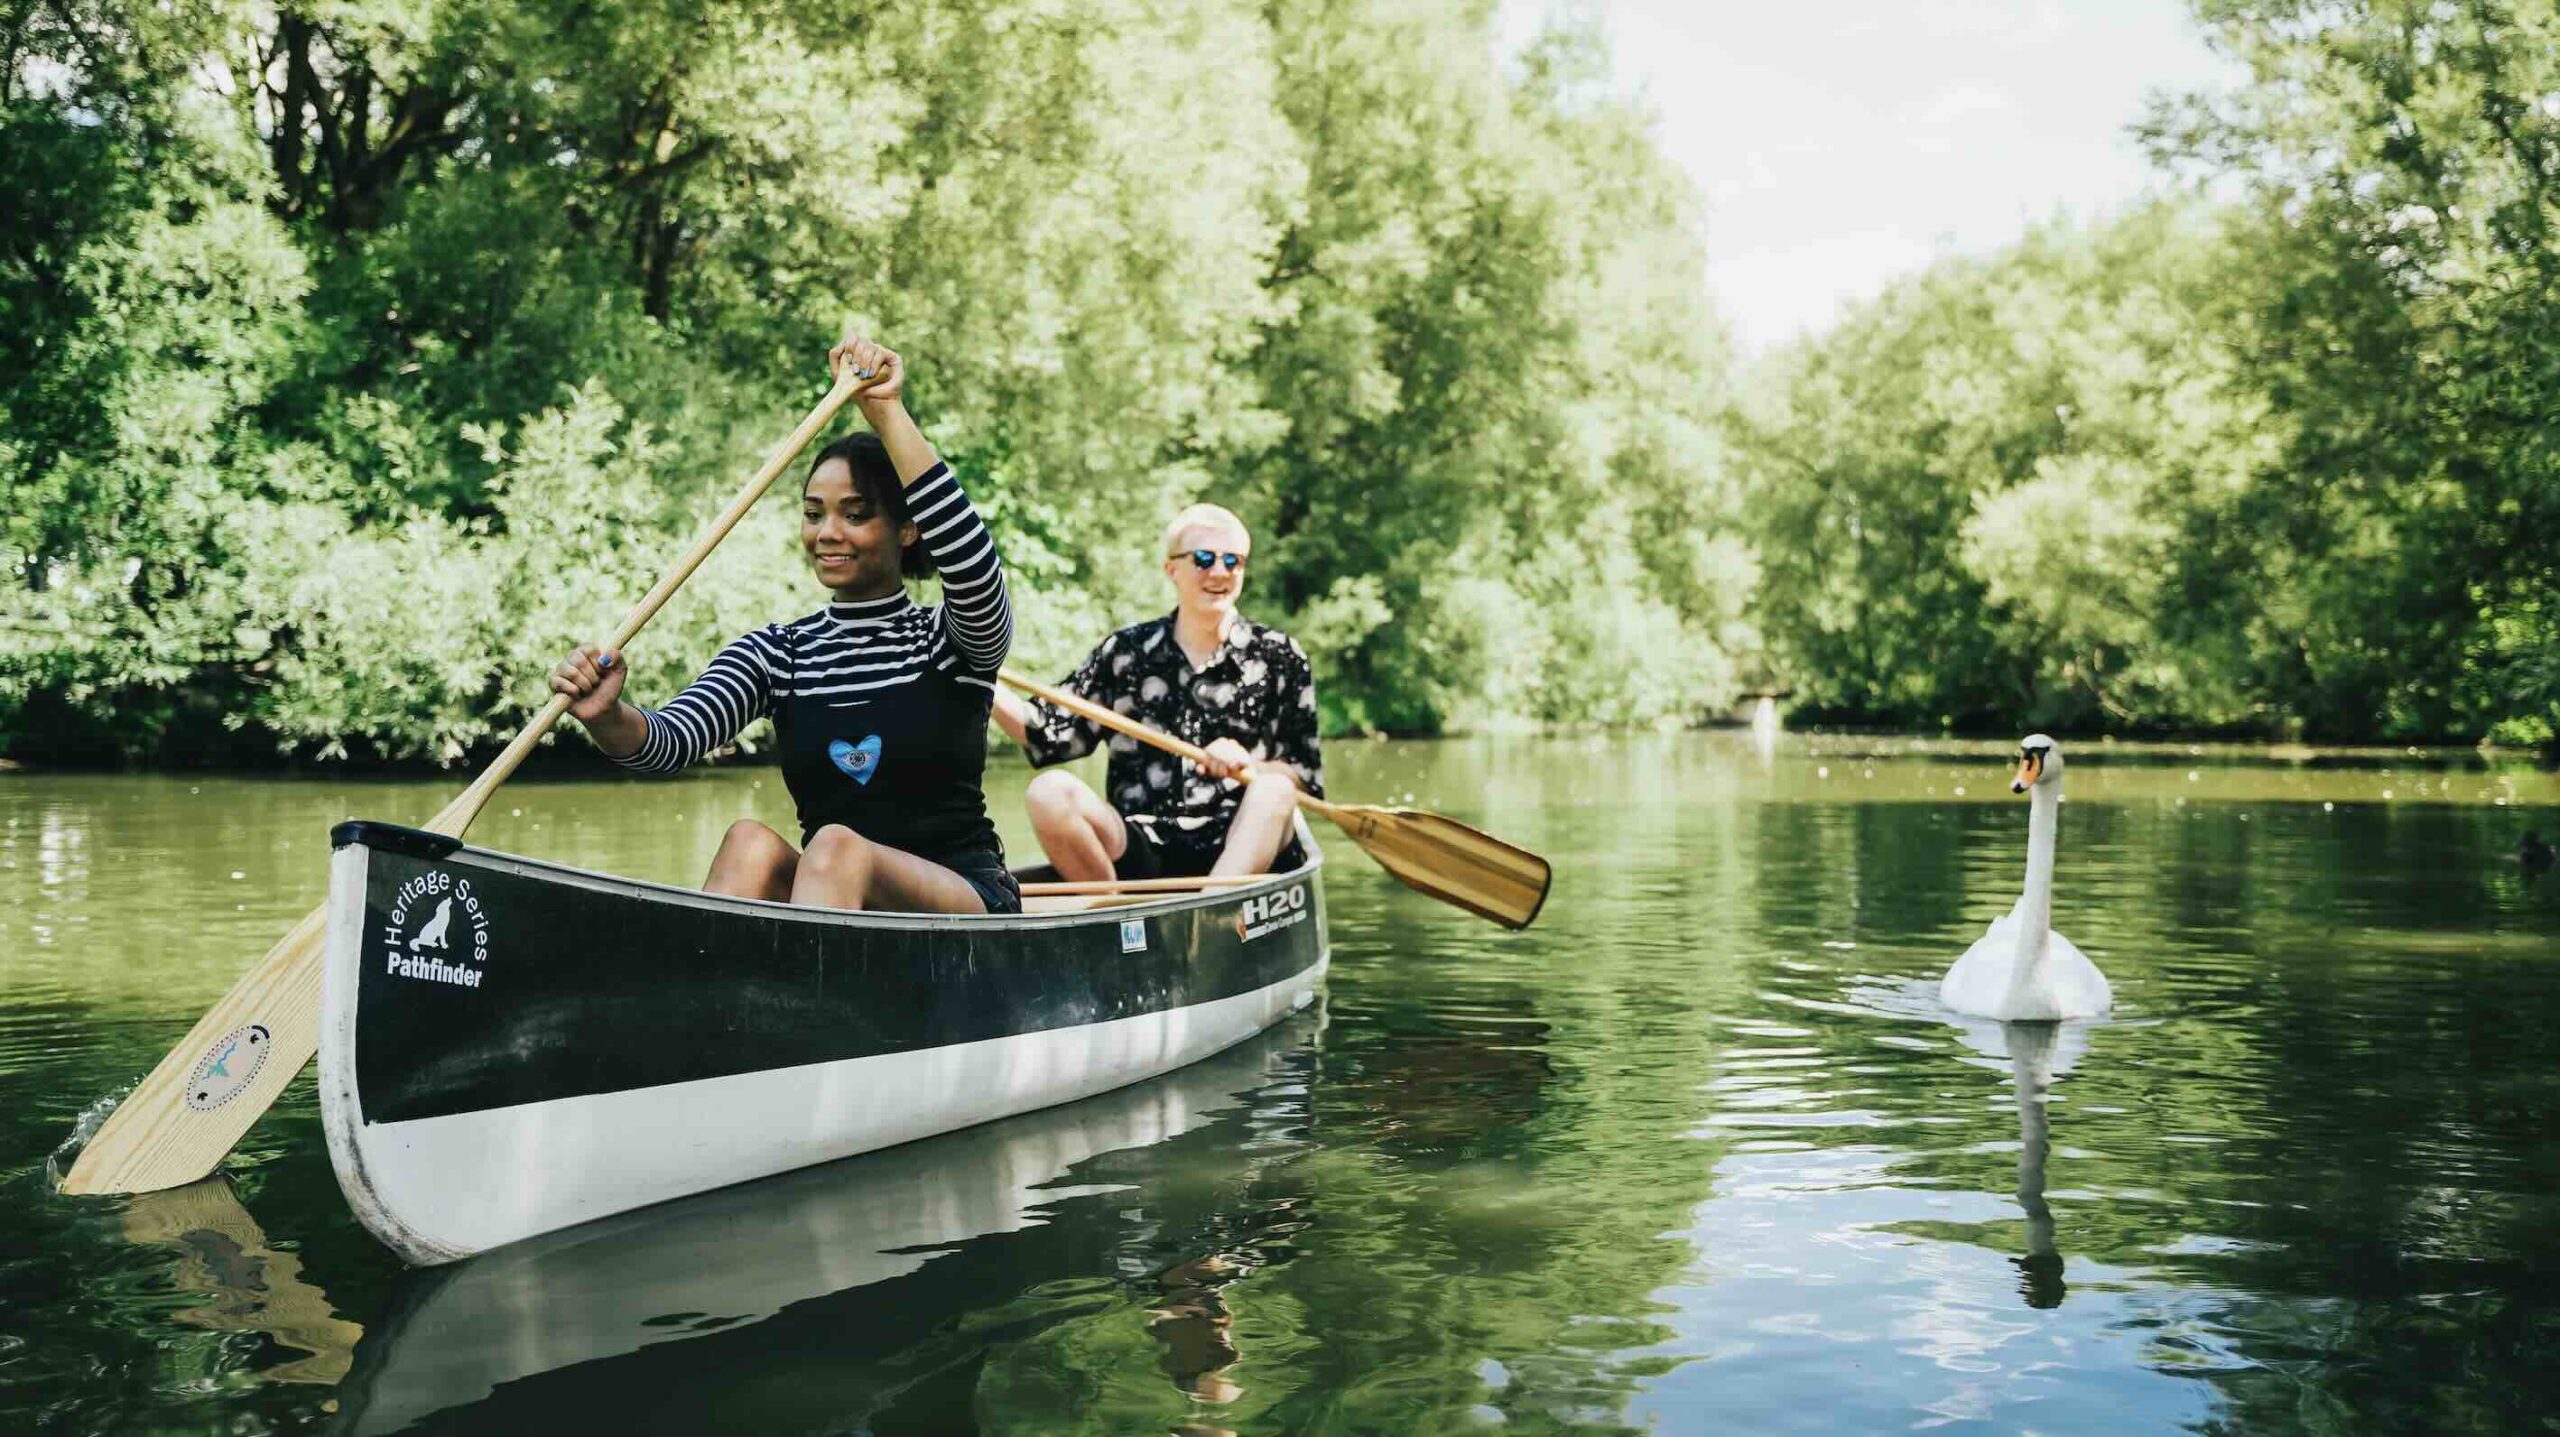 Paddle among the swans on the Avon River one of the best luxurious things to do in Stratford ON